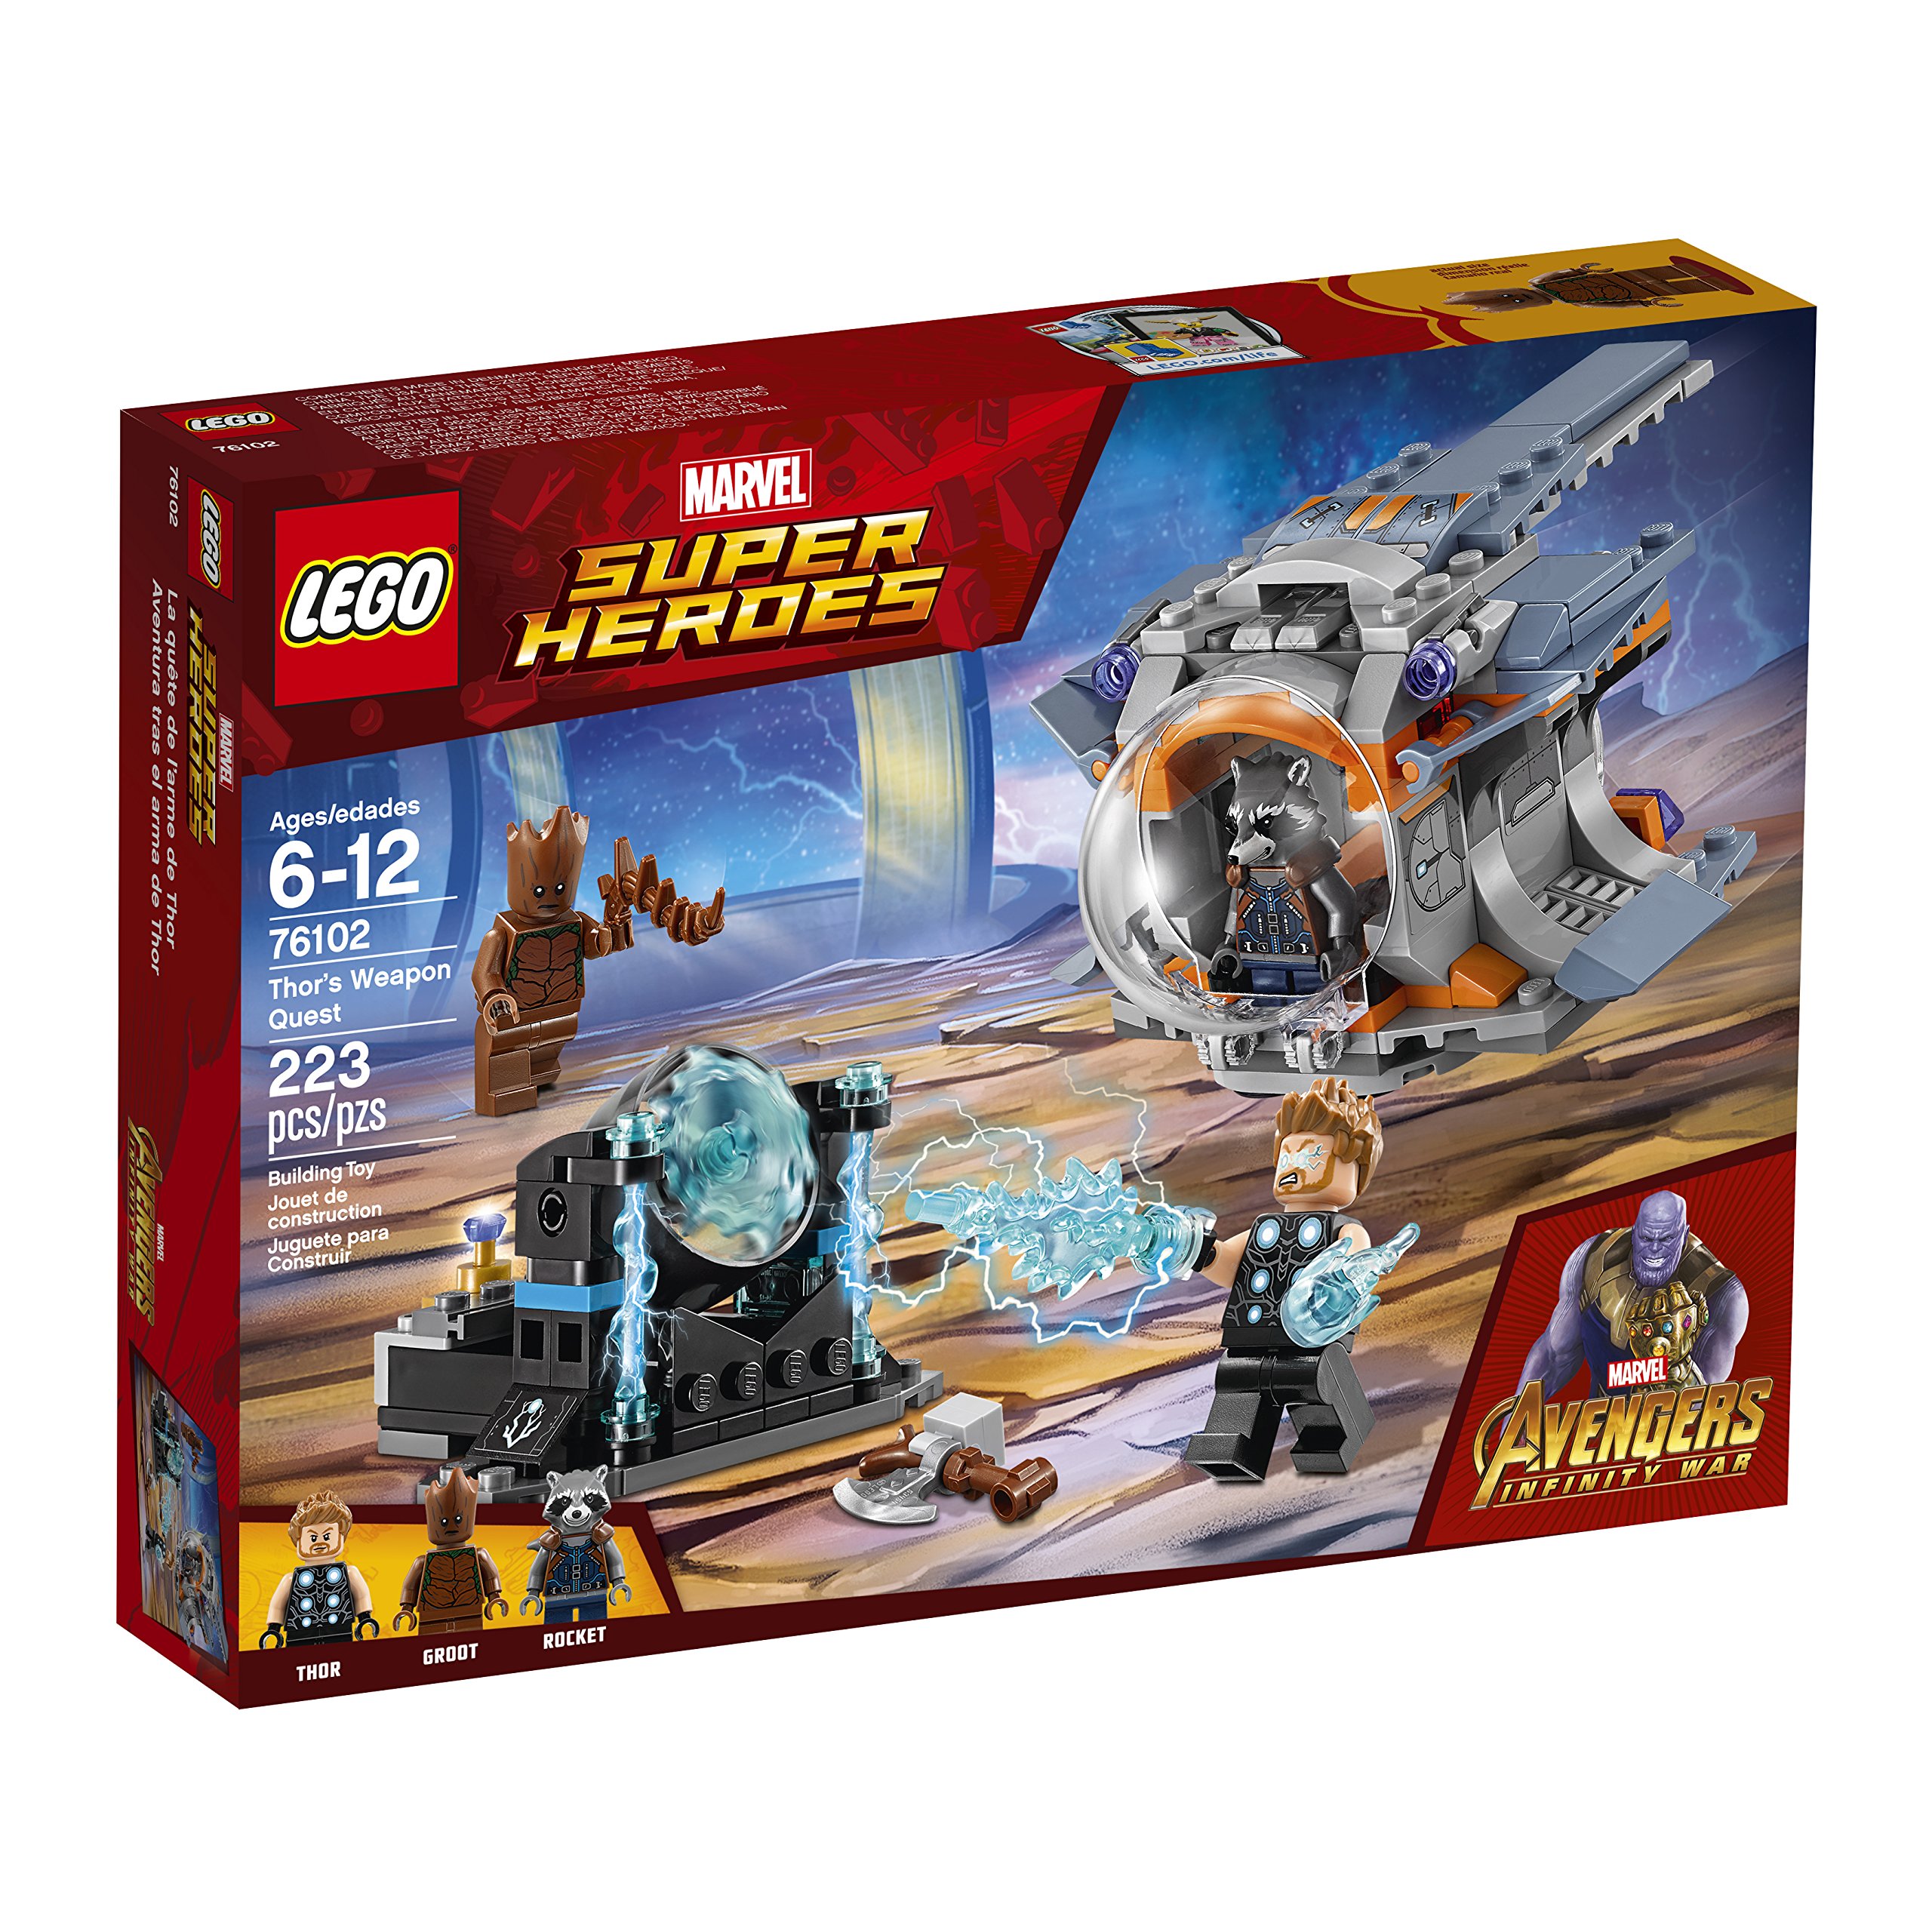 LEGO Marvel Super Heroes Avengers: Infinity War Thor's Weapon Quest 76102 Building Kit (223 Pieces)